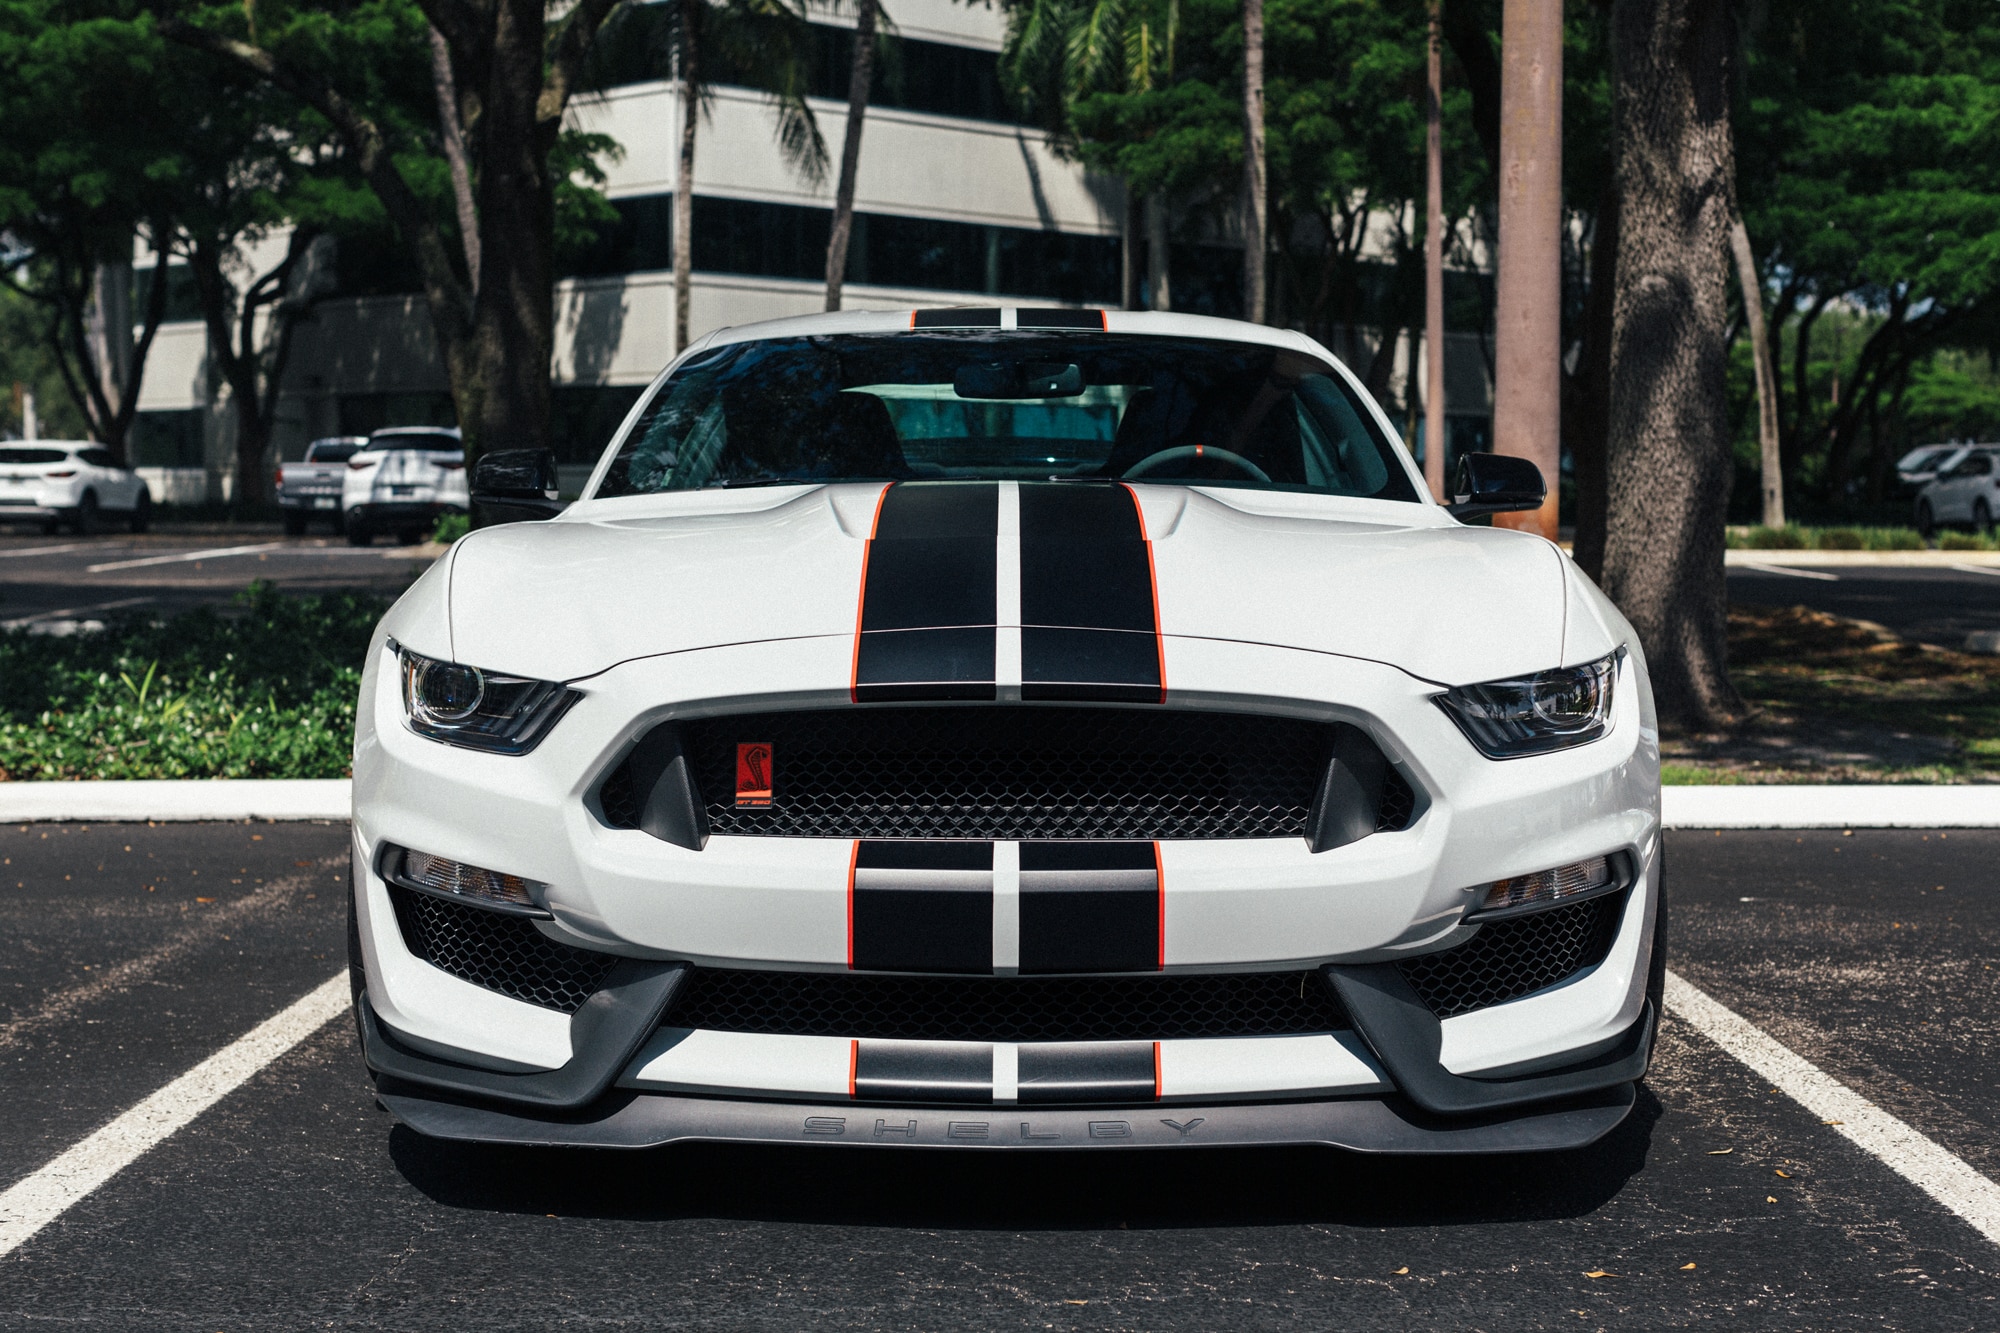 2016 Ford Shelby GT350R (S-197 II) | 1 of 172 in Avalanche Gray | Flat-Plane V8 | Carbon Fiber Wheels | 6-Speed Manual | Factory Recaros | Brembo BBK